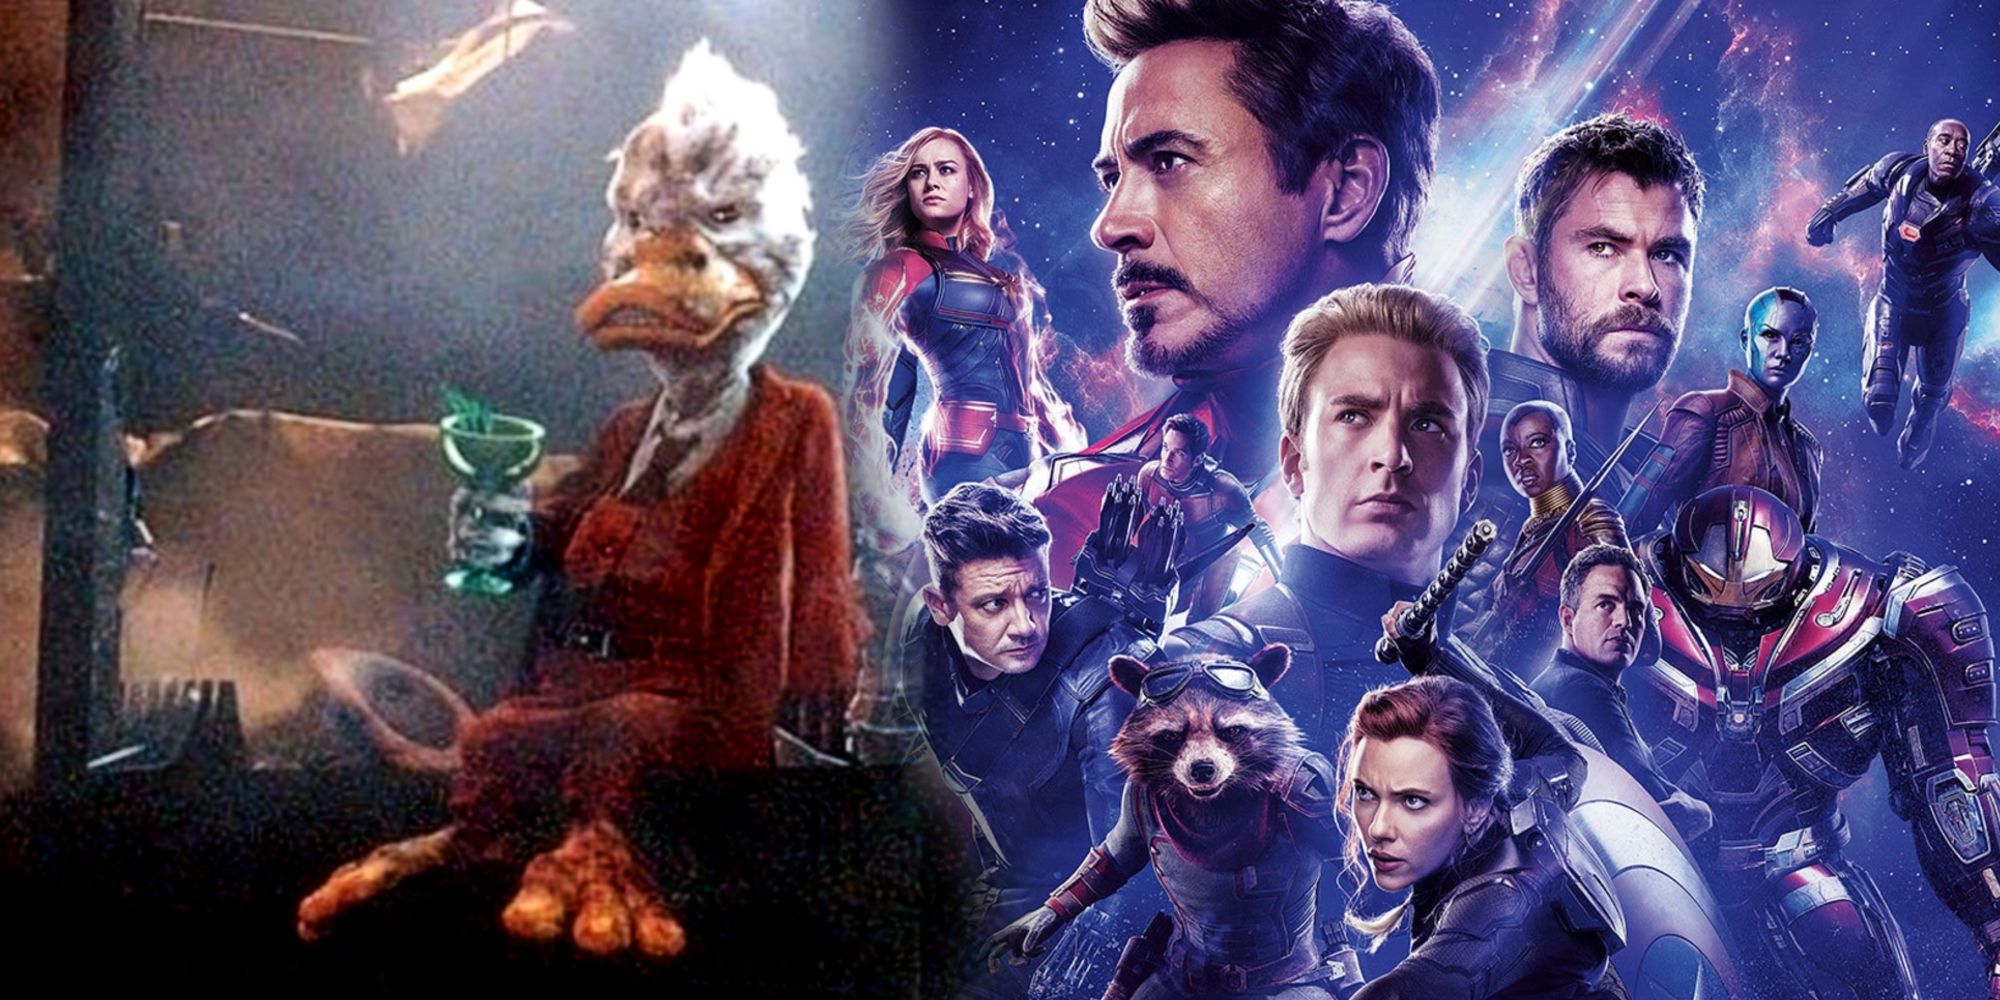 Howard the Duck in Guardians of the Galaxy and Avengers Endgame